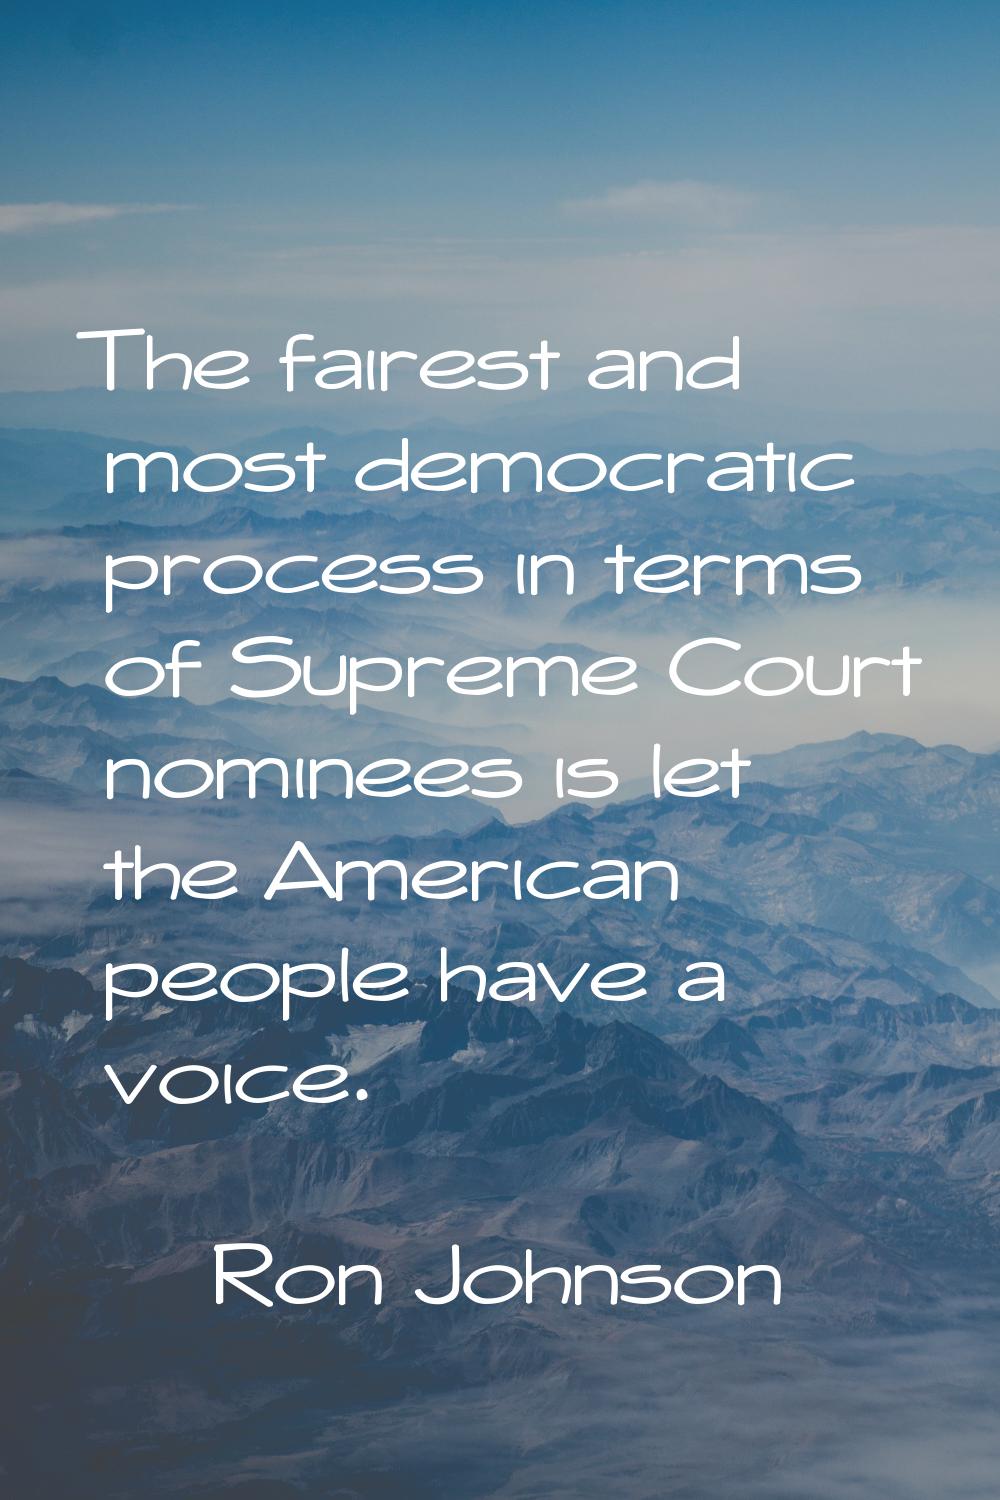 The fairest and most democratic process in terms of Supreme Court nominees is let the American peop